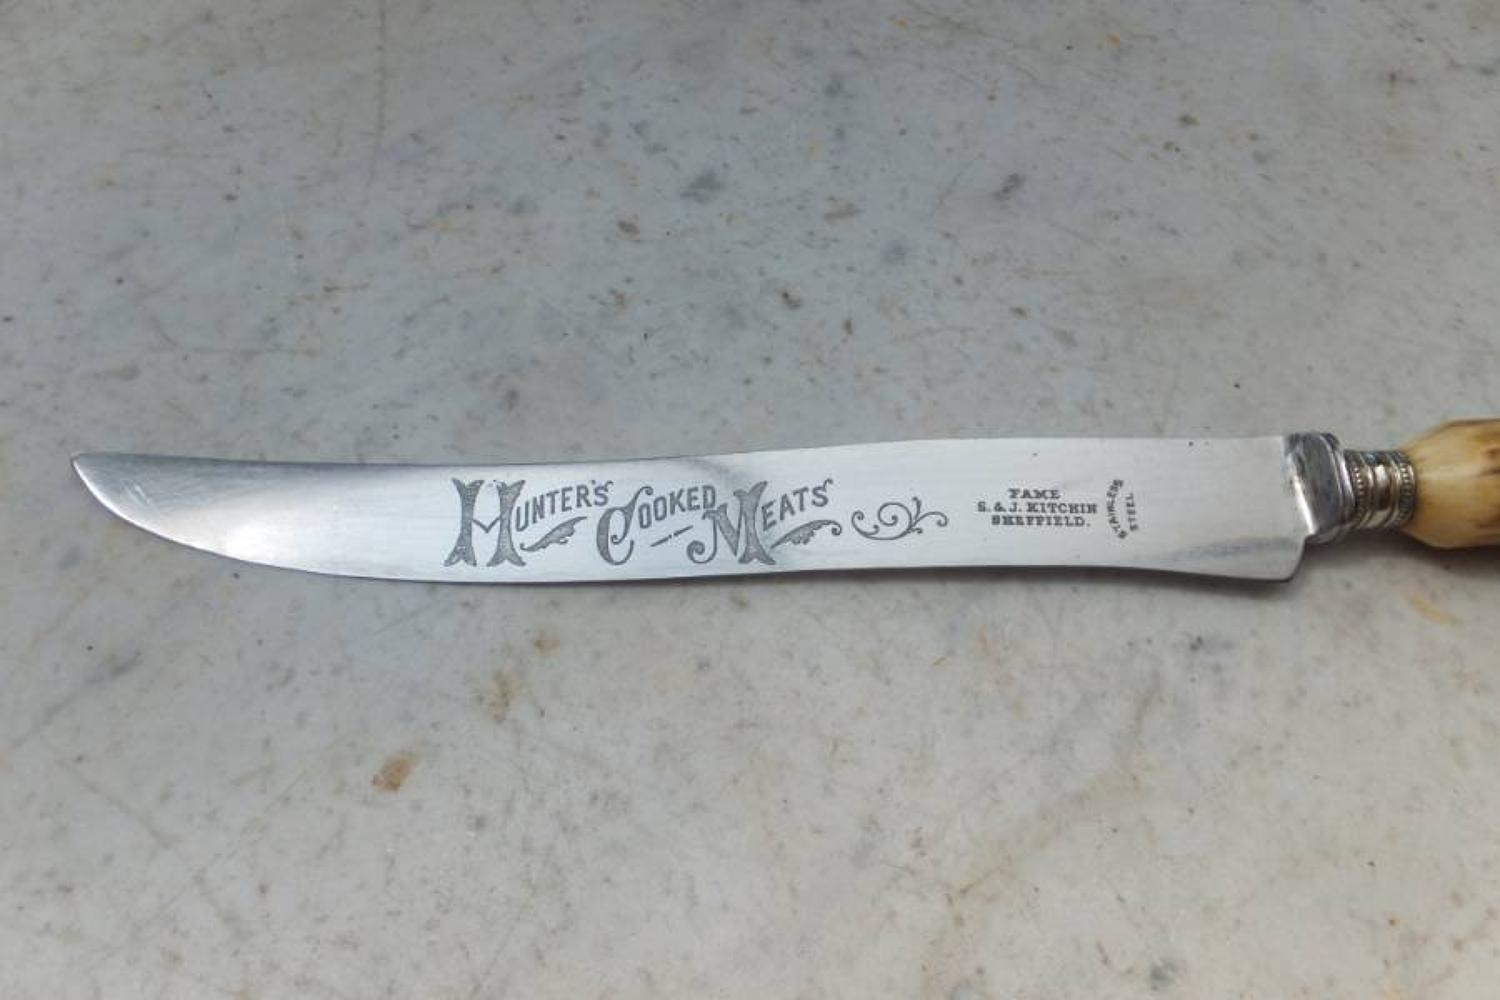 1920s Advertising Carving Knife - Hunters Cooked Meats